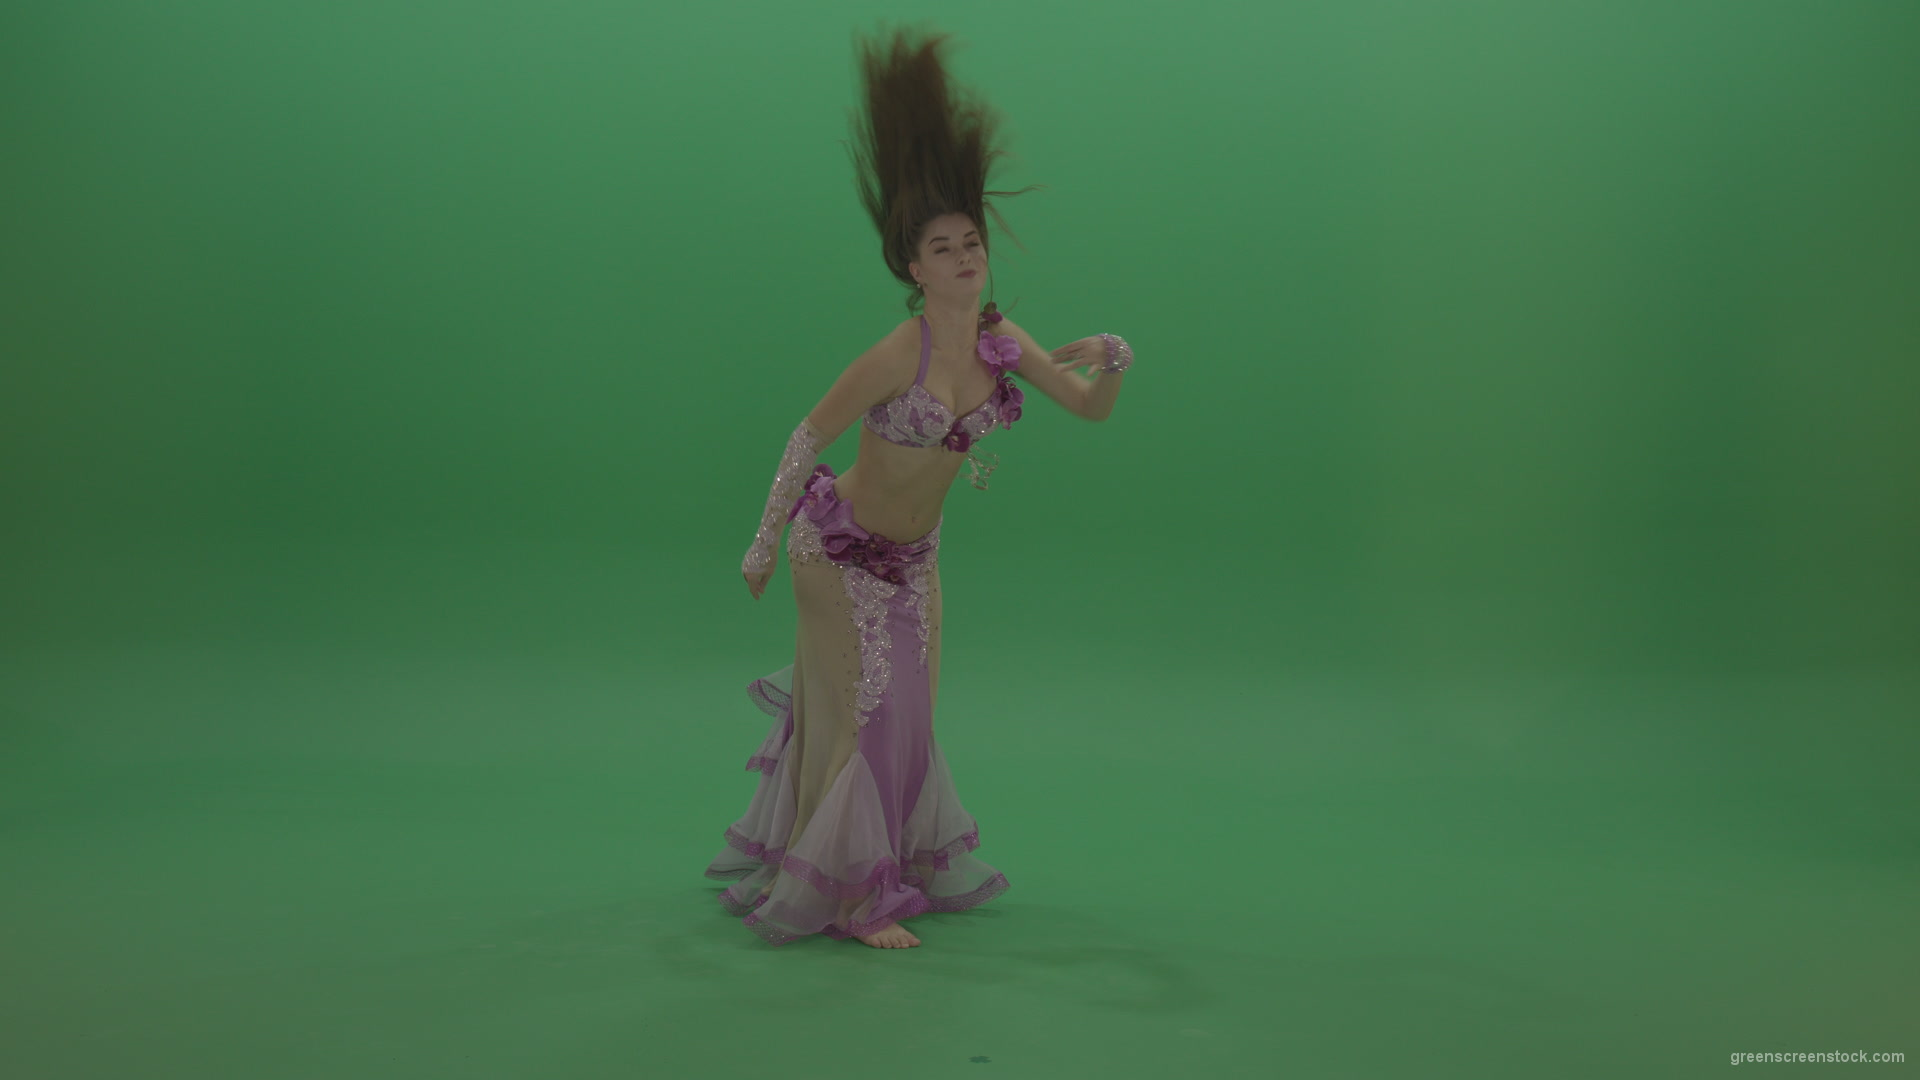 Sightly-belly-dancer-in-pink-wear-display-amazing-dance-moves-over-chromakey-background_008 Green Screen Stock